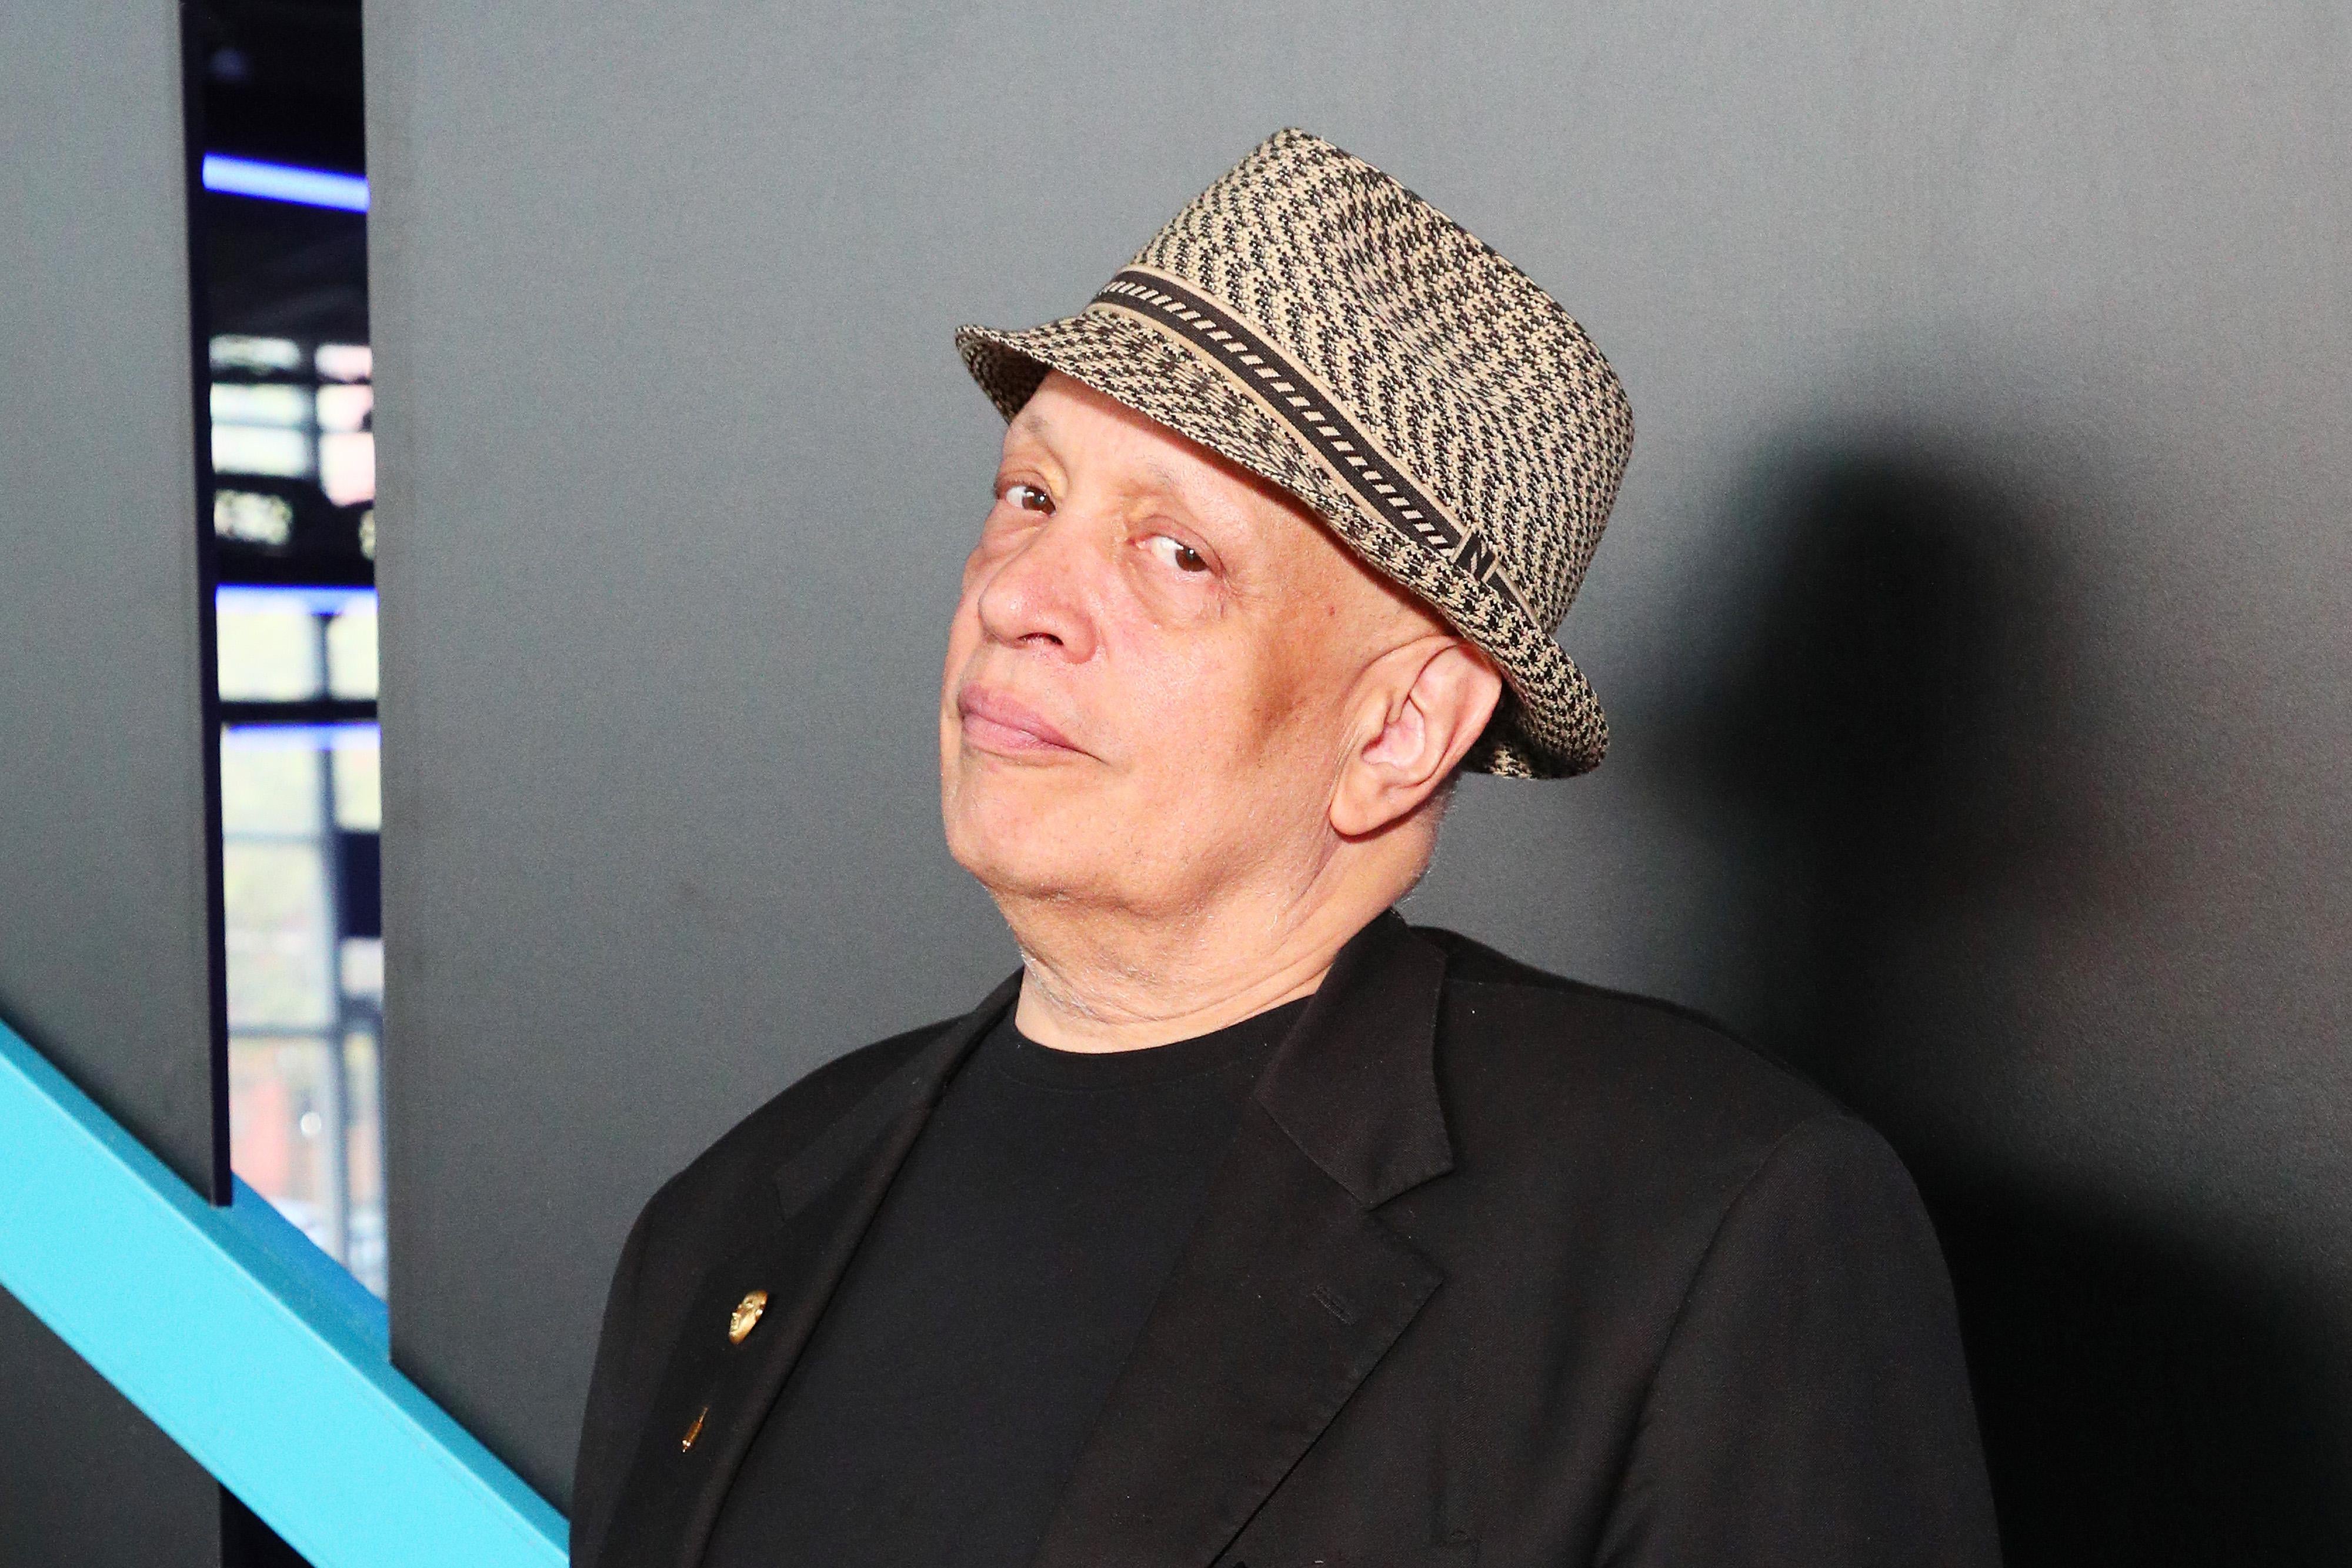 NEW YORK, NEW YORK - MAY 15: Walter Mosley attends the BAM Gala 2019 on May 15, 2019 in New York City. (Photo by Astrid Stawiarz/Getty Images for BAM)